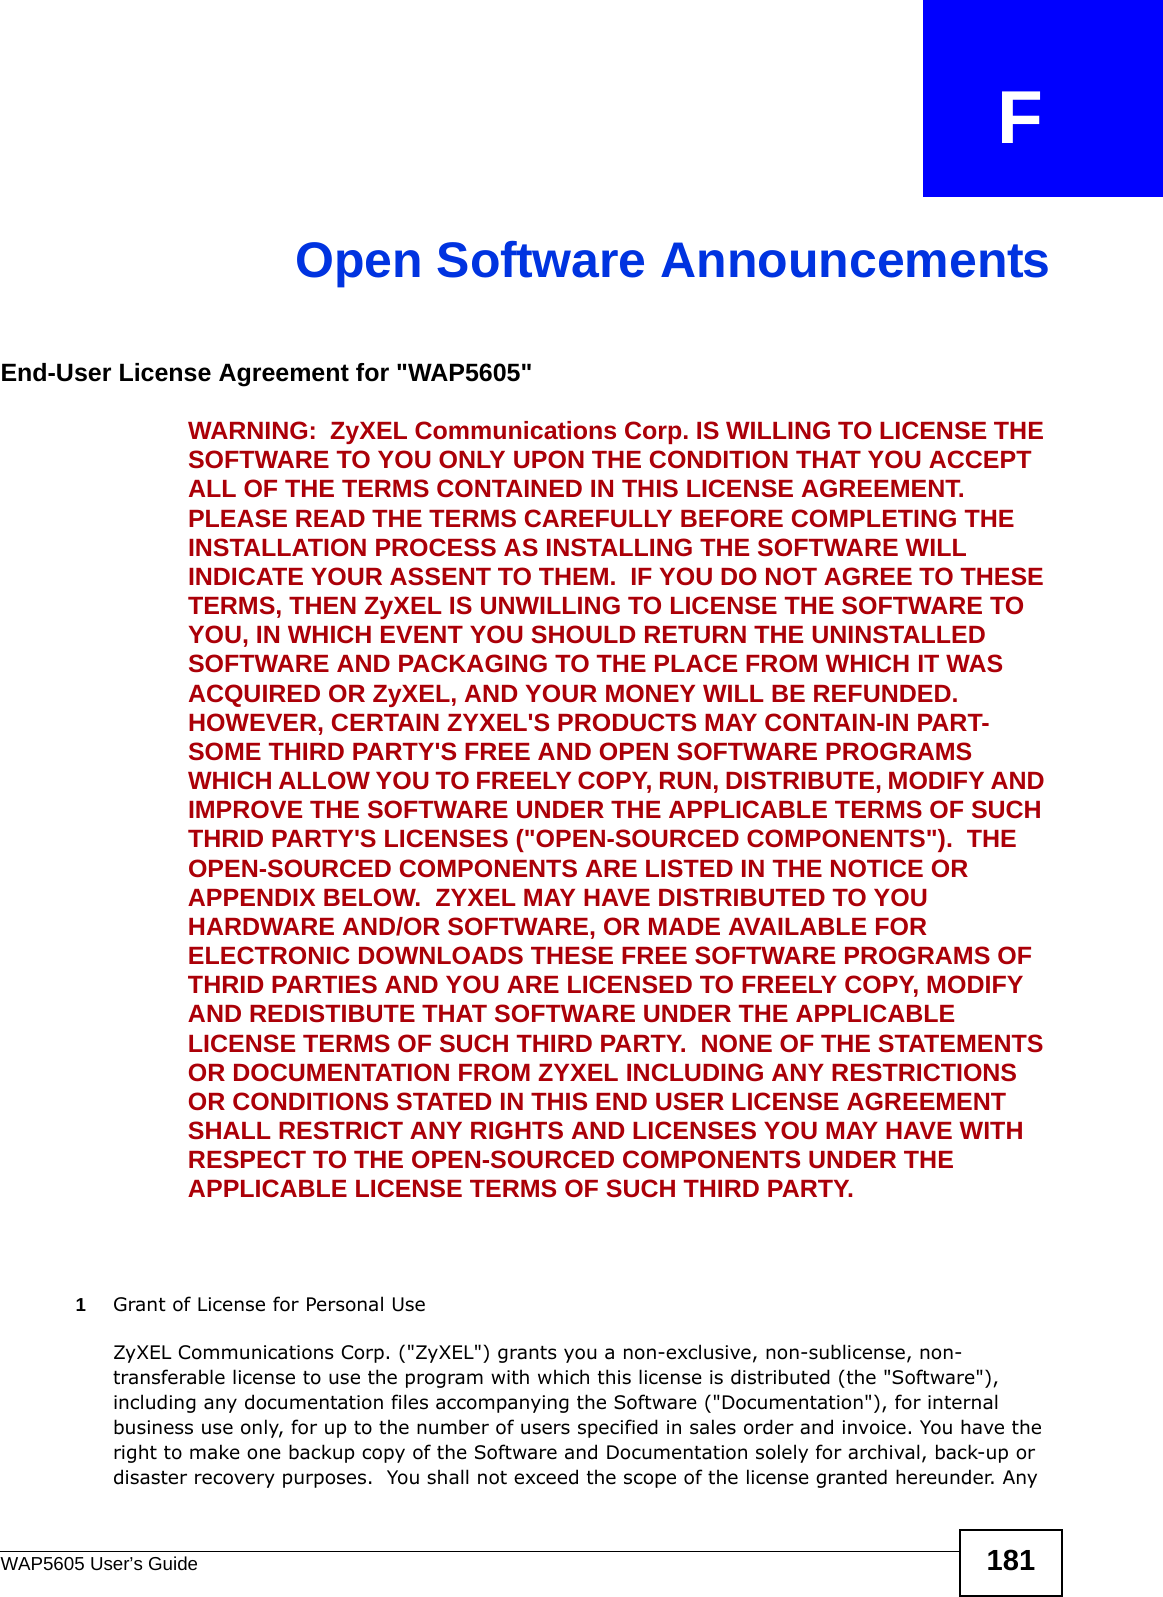 WAP5605 User’s Guide 181APPENDIX   FOpen Software AnnouncementsEnd-User License Agreement for &quot;WAP5605&quot; WARNING:  ZyXEL Communications Corp. IS WILLING TO LICENSE THE SOFTWARE TO YOU ONLY UPON THE CONDITION THAT YOU ACCEPT ALL OF THE TERMS CONTAINED IN THIS LICENSE AGREEMENT.  PLEASE READ THE TERMS CAREFULLY BEFORE COMPLETING THE INSTALLATION PROCESS AS INSTALLING THE SOFTWARE WILL INDICATE YOUR ASSENT TO THEM.  IF YOU DO NOT AGREE TO THESE TERMS, THEN ZyXEL IS UNWILLING TO LICENSE THE SOFTWARE TO YOU, IN WHICH EVENT YOU SHOULD RETURN THE UNINSTALLED SOFTWARE AND PACKAGING TO THE PLACE FROM WHICH IT WAS ACQUIRED OR ZyXEL, AND YOUR MONEY WILL BE REFUNDED.   HOWEVER, CERTAIN ZYXEL&apos;S PRODUCTS MAY CONTAIN-IN PART-SOME THIRD PARTY&apos;S FREE AND OPEN SOFTWARE PROGRAMS WHICH ALLOW YOU TO FREELY COPY, RUN, DISTRIBUTE, MODIFY AND IMPROVE THE SOFTWARE UNDER THE APPLICABLE TERMS OF SUCH THRID PARTY&apos;S LICENSES (&quot;OPEN-SOURCED COMPONENTS&quot;).  THE OPEN-SOURCED COMPONENTS ARE LISTED IN THE NOTICE OR APPENDIX BELOW.  ZYXEL MAY HAVE DISTRIBUTED TO YOU HARDWARE AND/OR SOFTWARE, OR MADE AVAILABLE FOR ELECTRONIC DOWNLOADS THESE FREE SOFTWARE PROGRAMS OF THRID PARTIES AND YOU ARE LICENSED TO FREELY COPY, MODIFY AND REDISTIBUTE THAT SOFTWARE UNDER THE APPLICABLE LICENSE TERMS OF SUCH THIRD PARTY.  NONE OF THE STATEMENTS OR DOCUMENTATION FROM ZYXEL INCLUDING ANY RESTRICTIONS OR CONDITIONS STATED IN THIS END USER LICENSE AGREEMENT SHALL RESTRICT ANY RIGHTS AND LICENSES YOU MAY HAVE WITH RESPECT TO THE OPEN-SOURCED COMPONENTS UNDER THE APPLICABLE LICENSE TERMS OF SUCH THIRD PARTY.   1Grant of License for Personal UseZyXEL Communications Corp. (&quot;ZyXEL&quot;) grants you a non-exclusive, non-sublicense, non-transferable license to use the program with which this license is distributed (the &quot;Software&quot;), including any documentation files accompanying the Software (&quot;Documentation&quot;), for internal business use only, for up to the number of users specified in sales order and invoice. You have the right to make one backup copy of the Software and Documentation solely for archival, back-up or disaster recovery purposes.  You shall not exceed the scope of the license granted hereunder. Any 